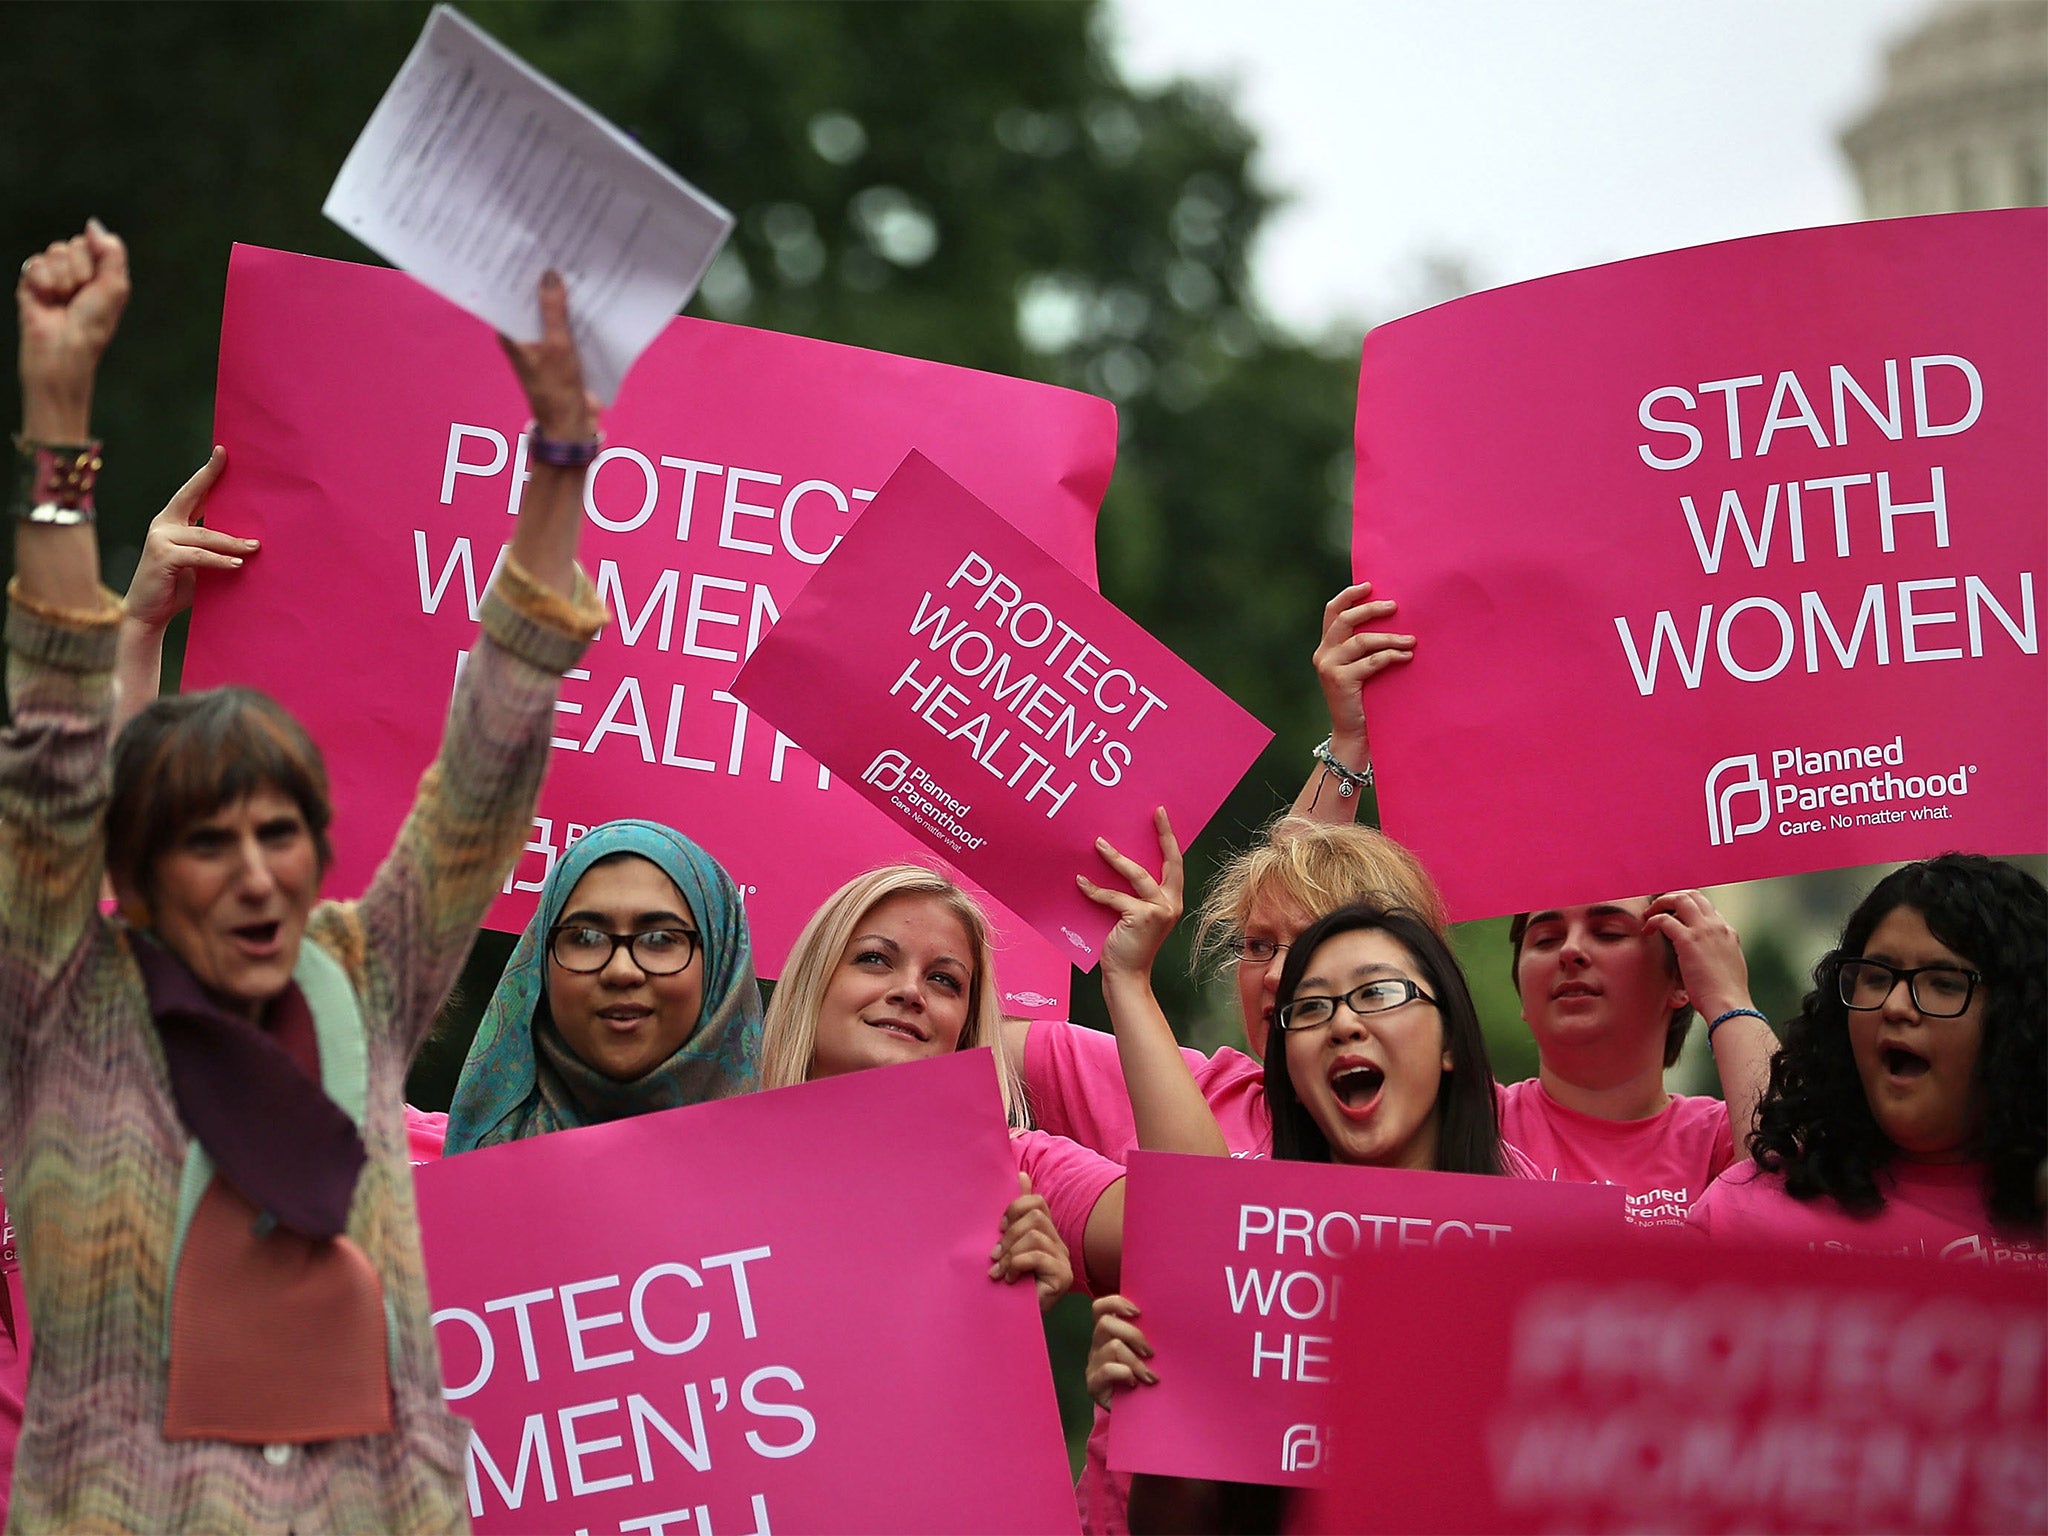 Protestors gather to support women's right to choose